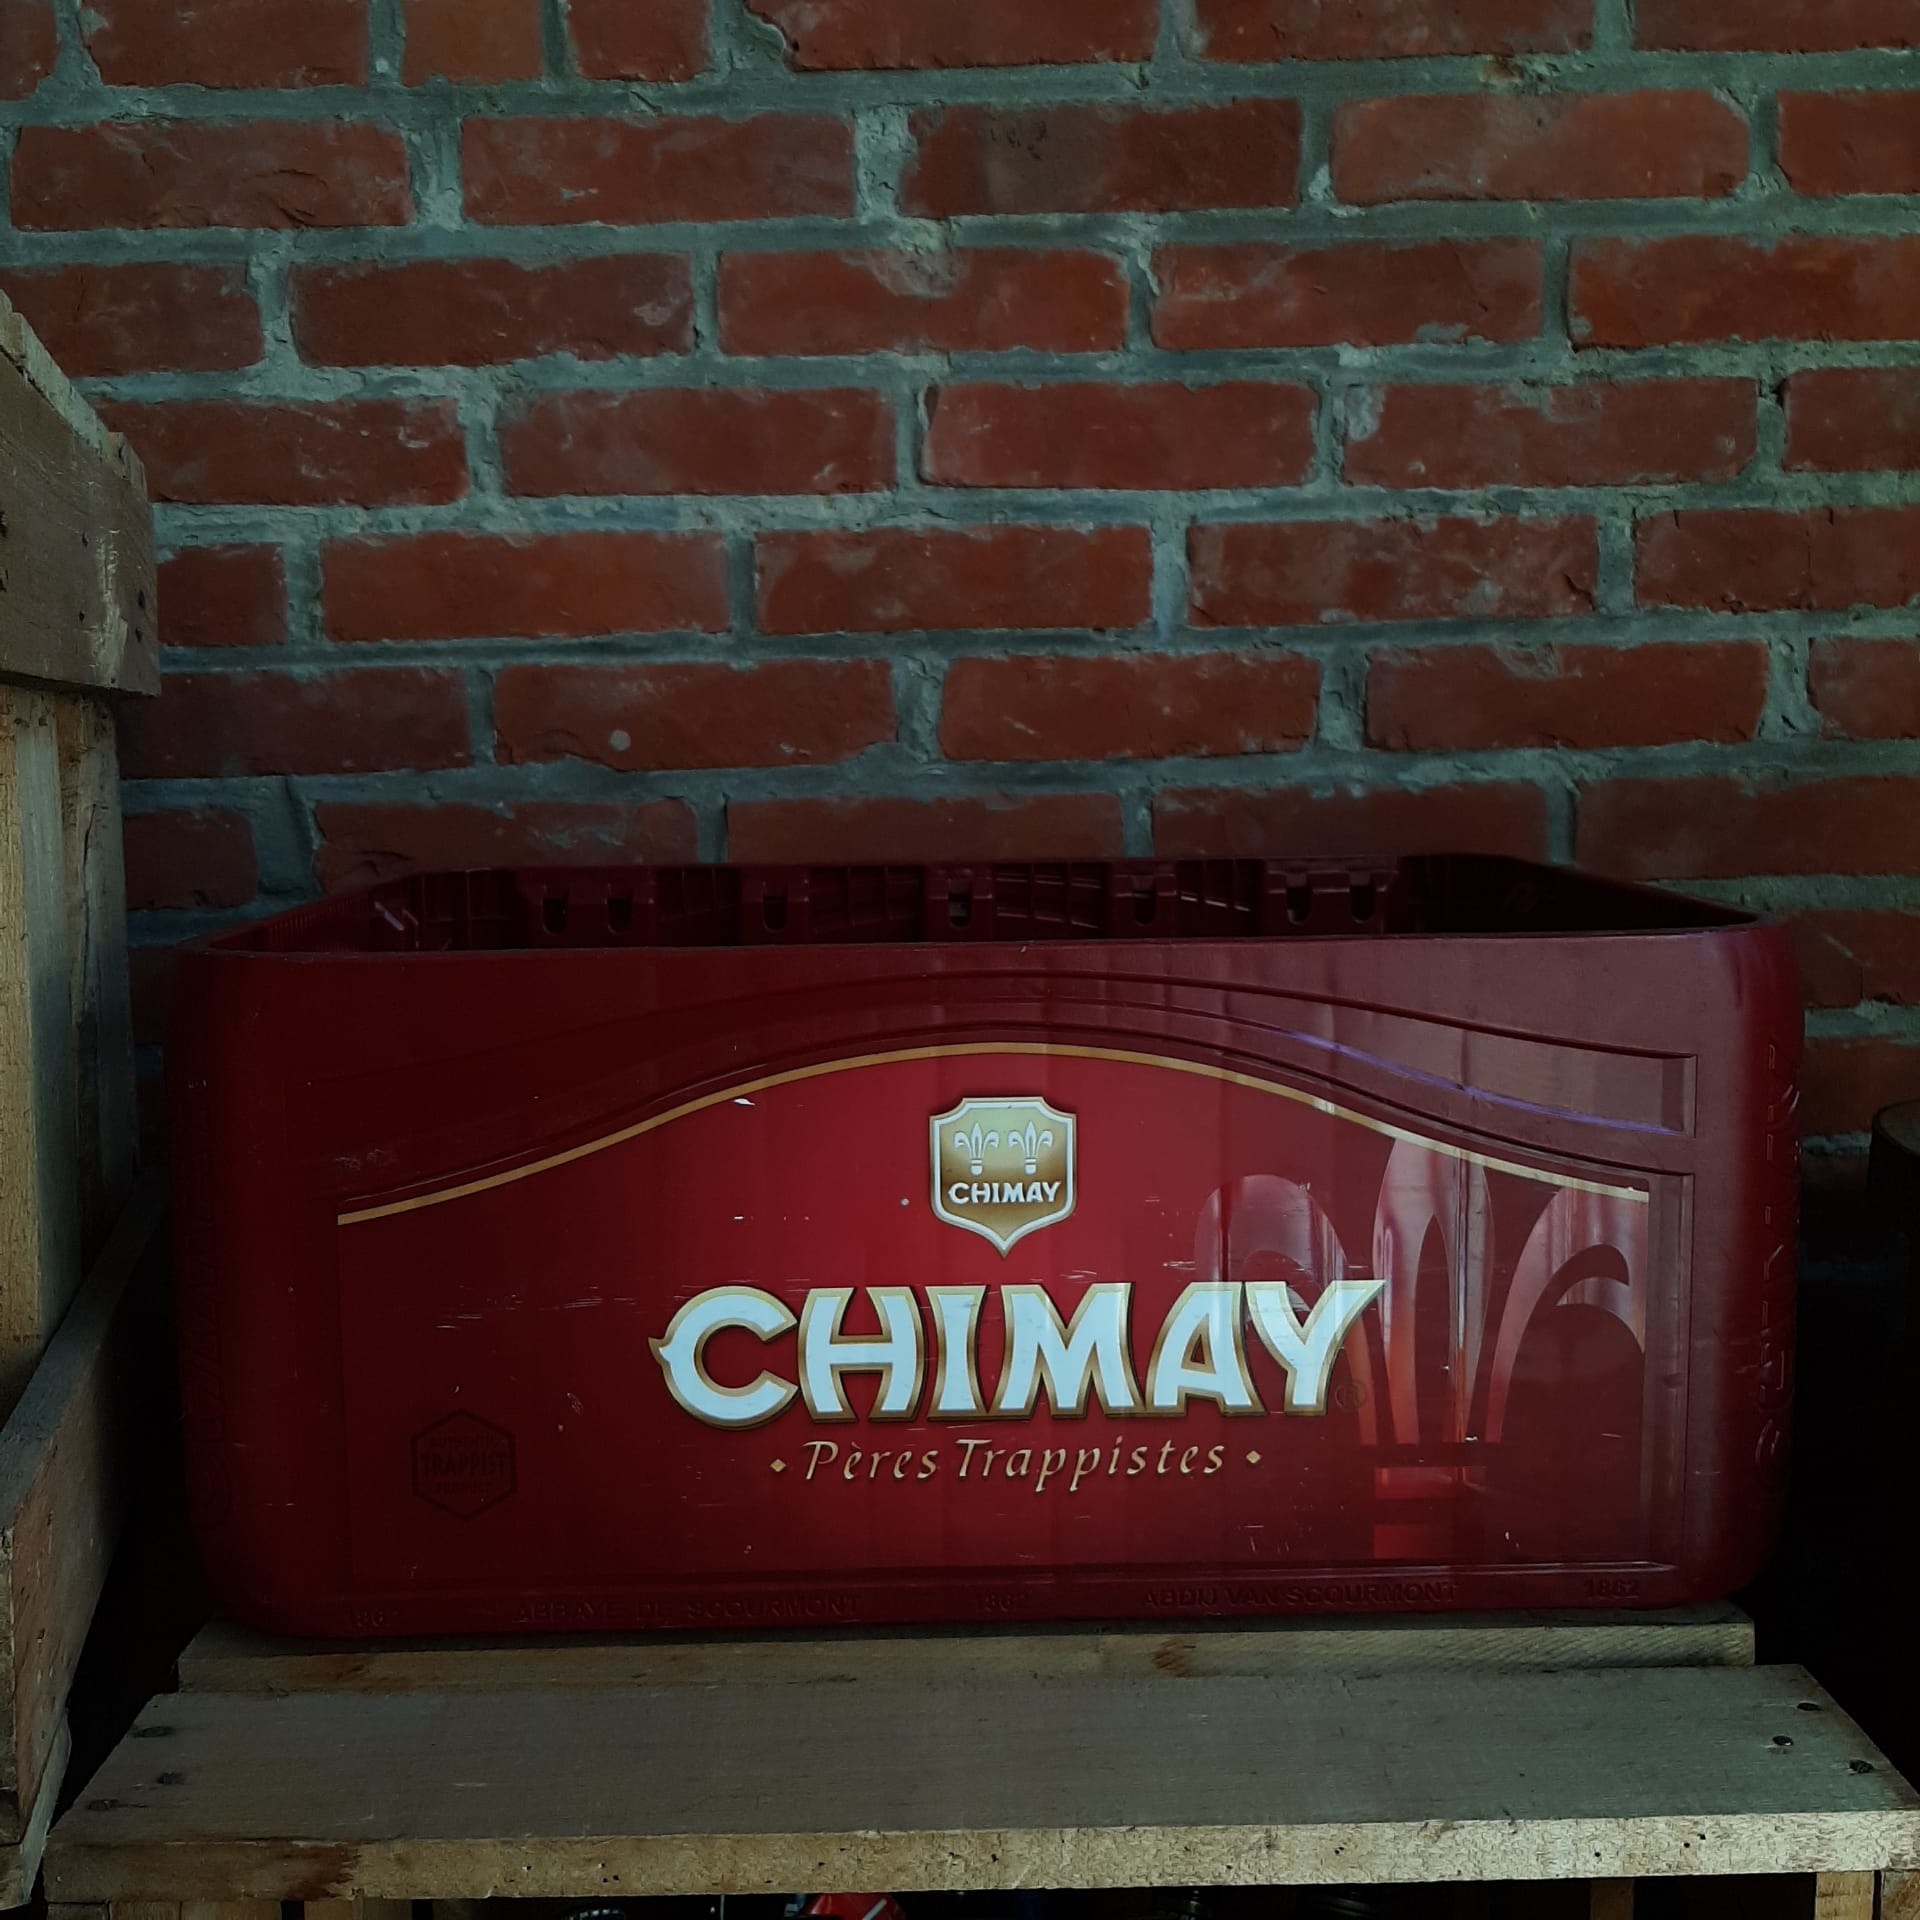 EMPTY CRATE CHIMAY